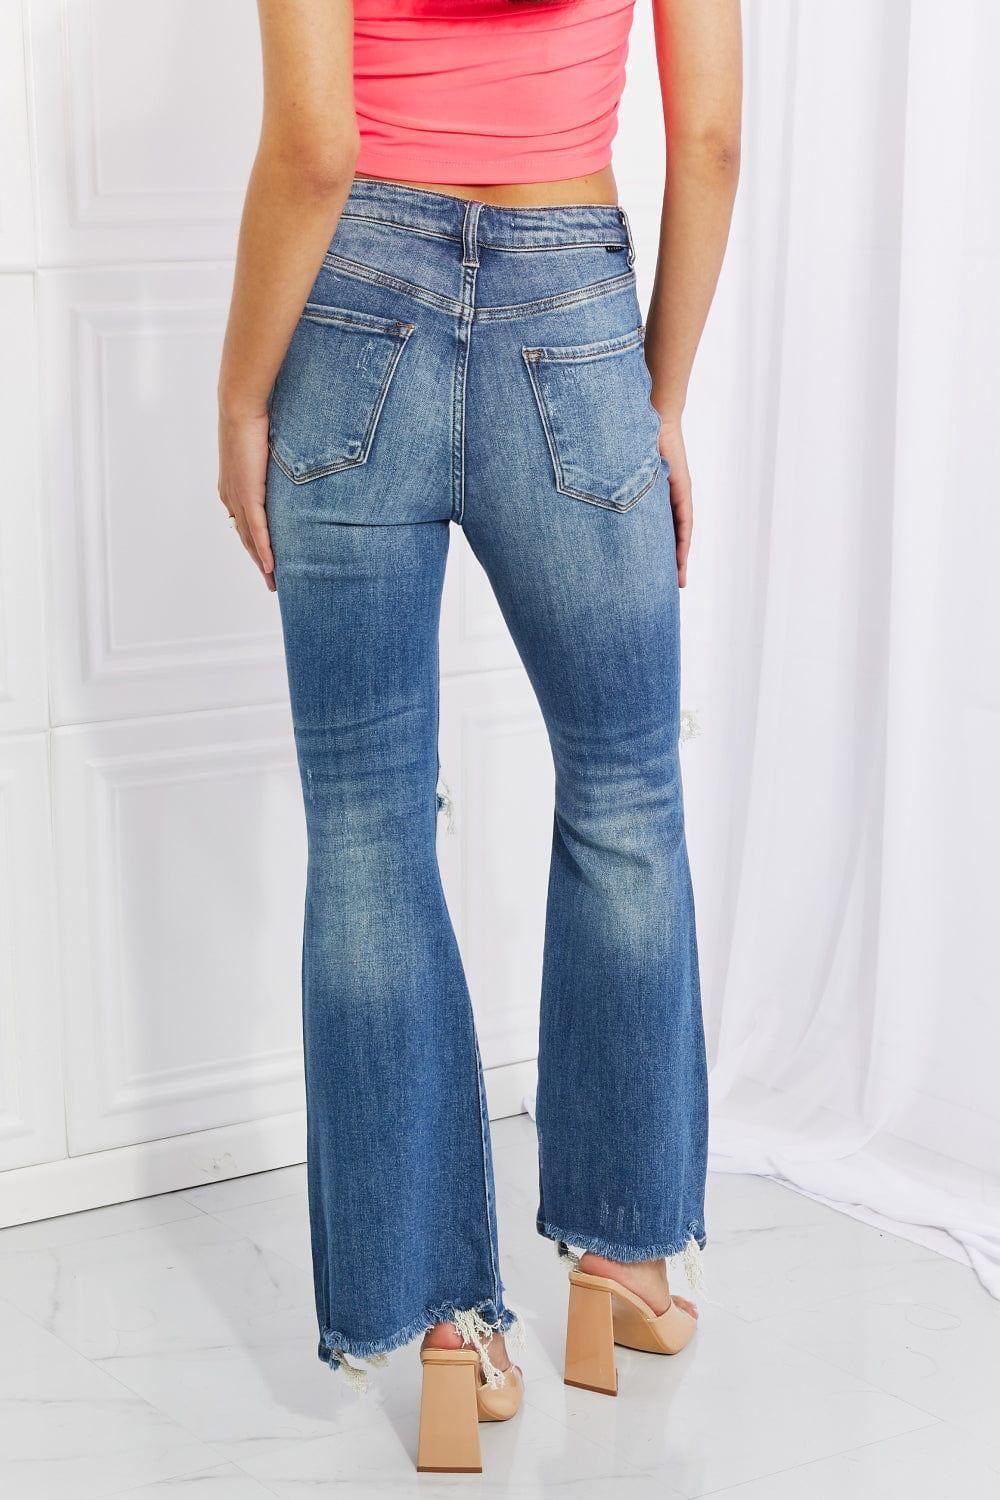 RISEN - Hazel High Rise Distressed Flare Jeans - Inspired Eye Boutique